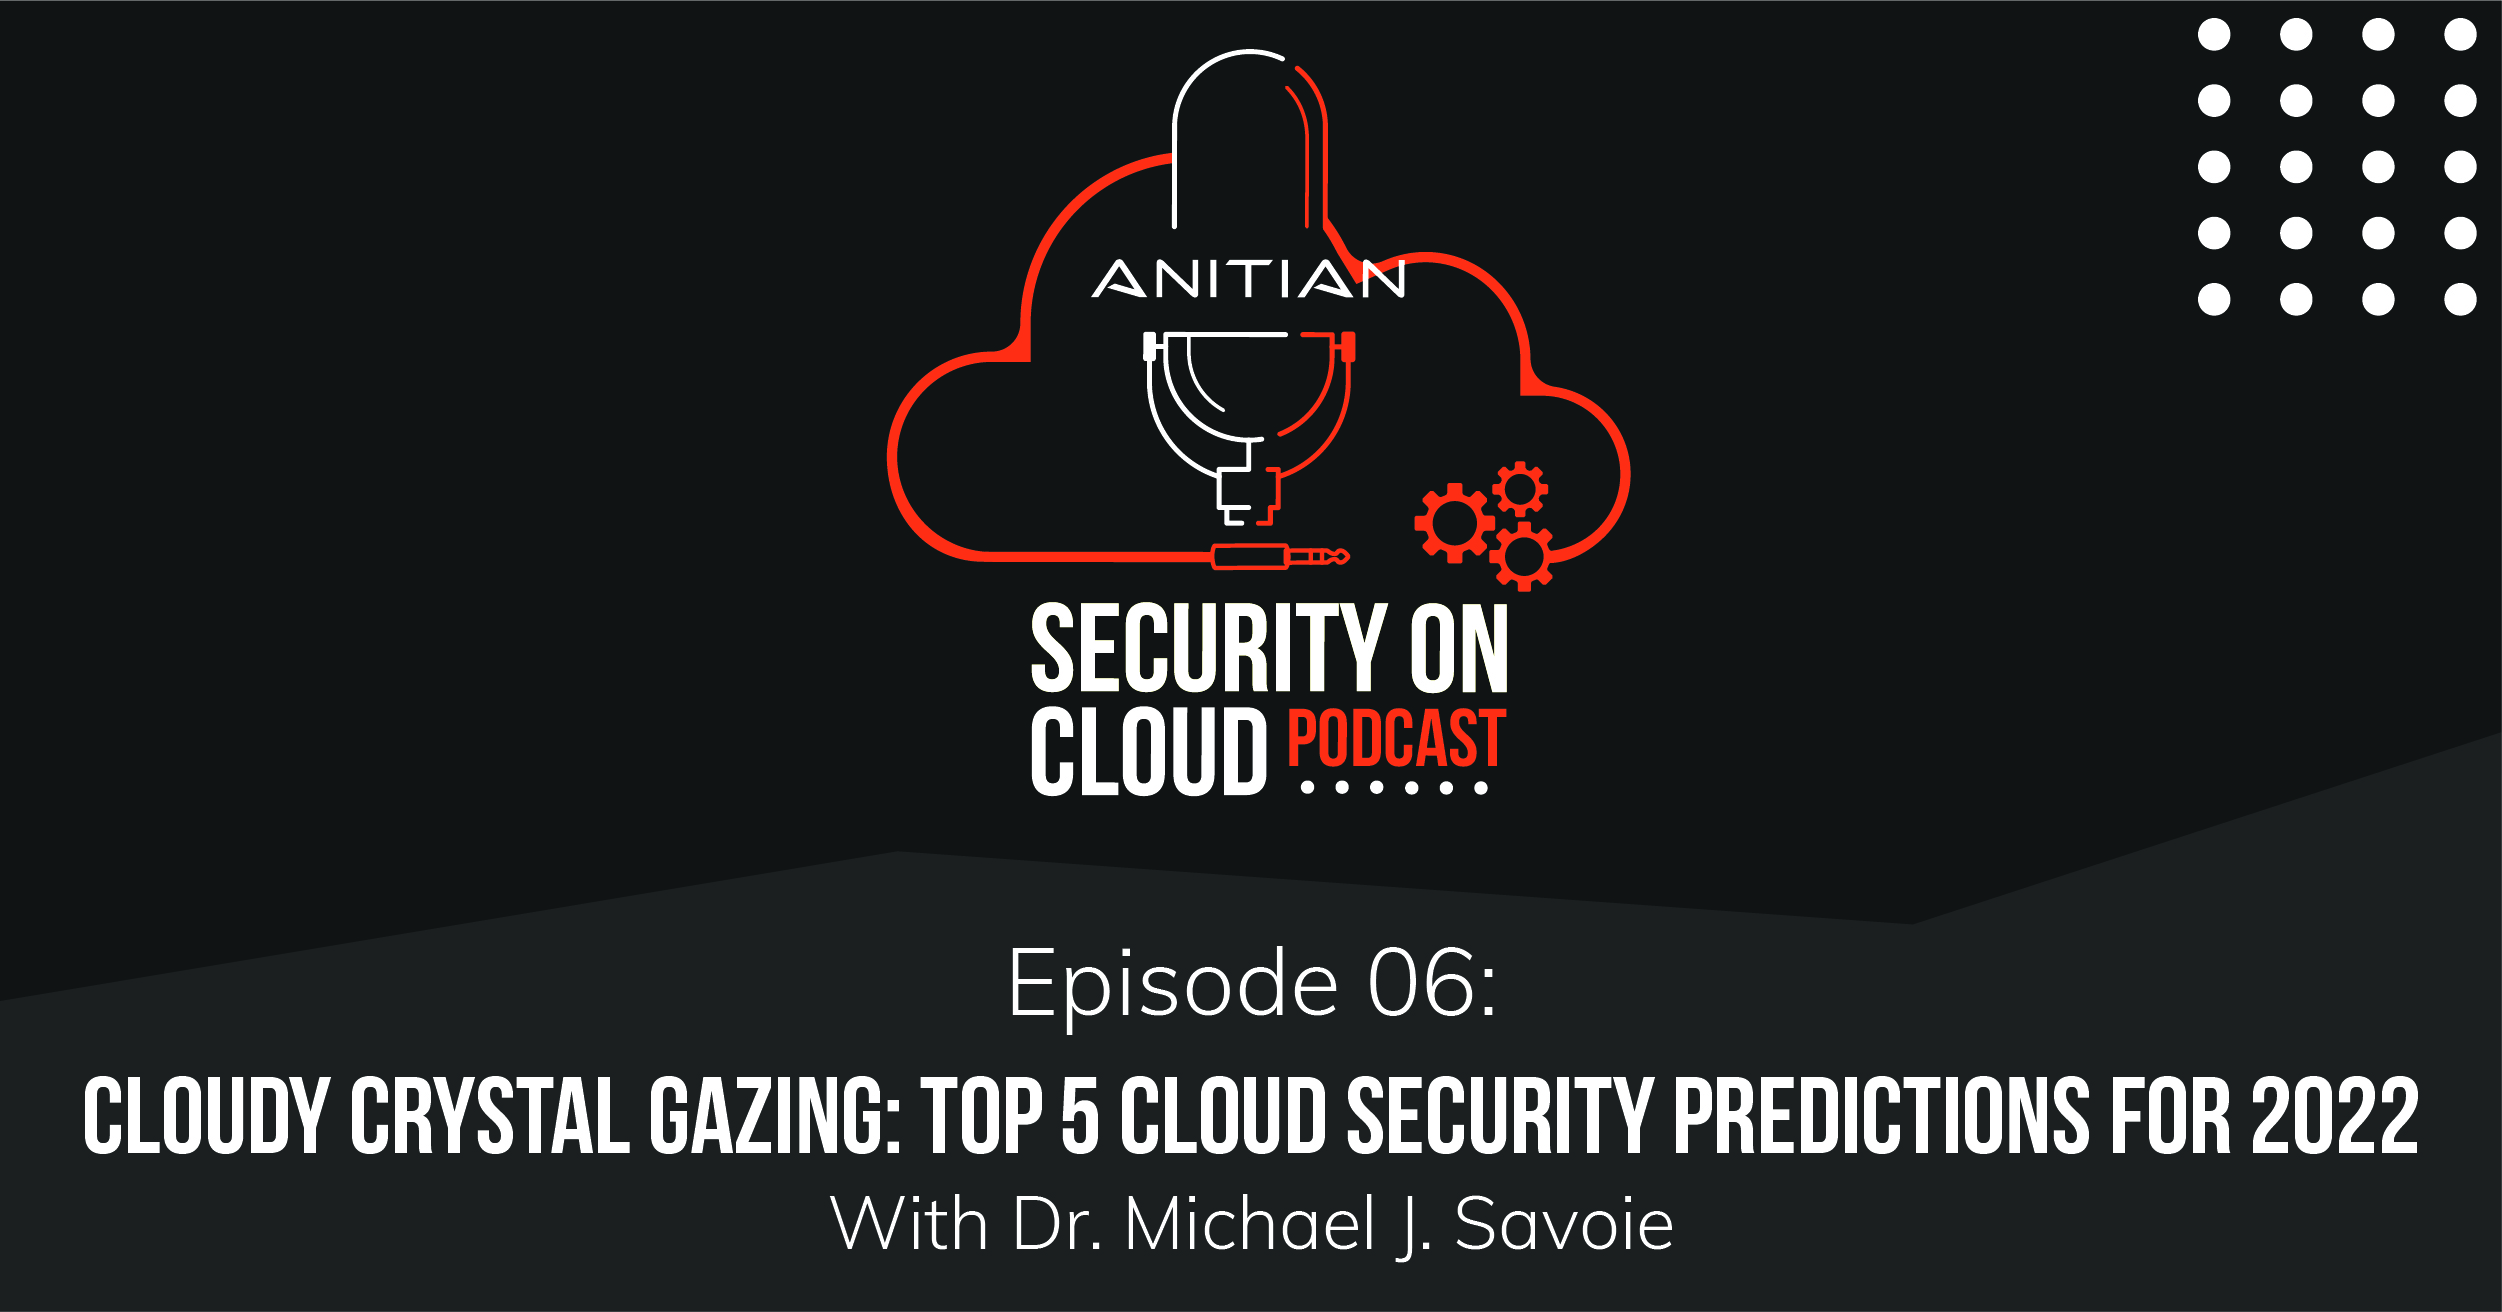 Cloudy Crystal Gazing: Top 5 Cloud Security Predictions for 2022